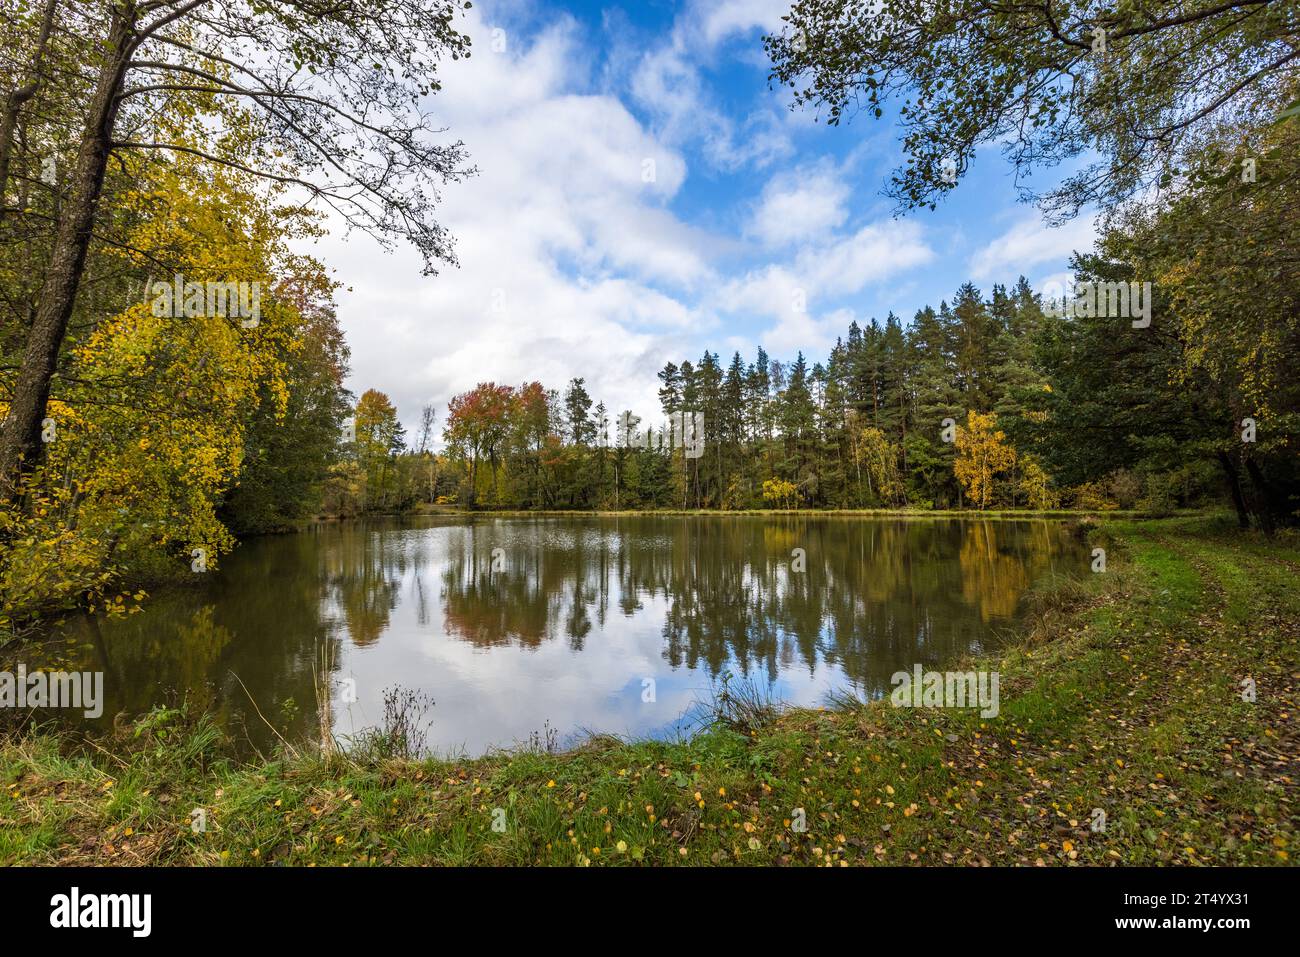 Many ponds in the Waldnaabaue are several centuries old. Carp ponds in the Upper Palatinate form one of the oldest cultural landscapes in Europe. Wiesau (VGem), Germany Stock Photo